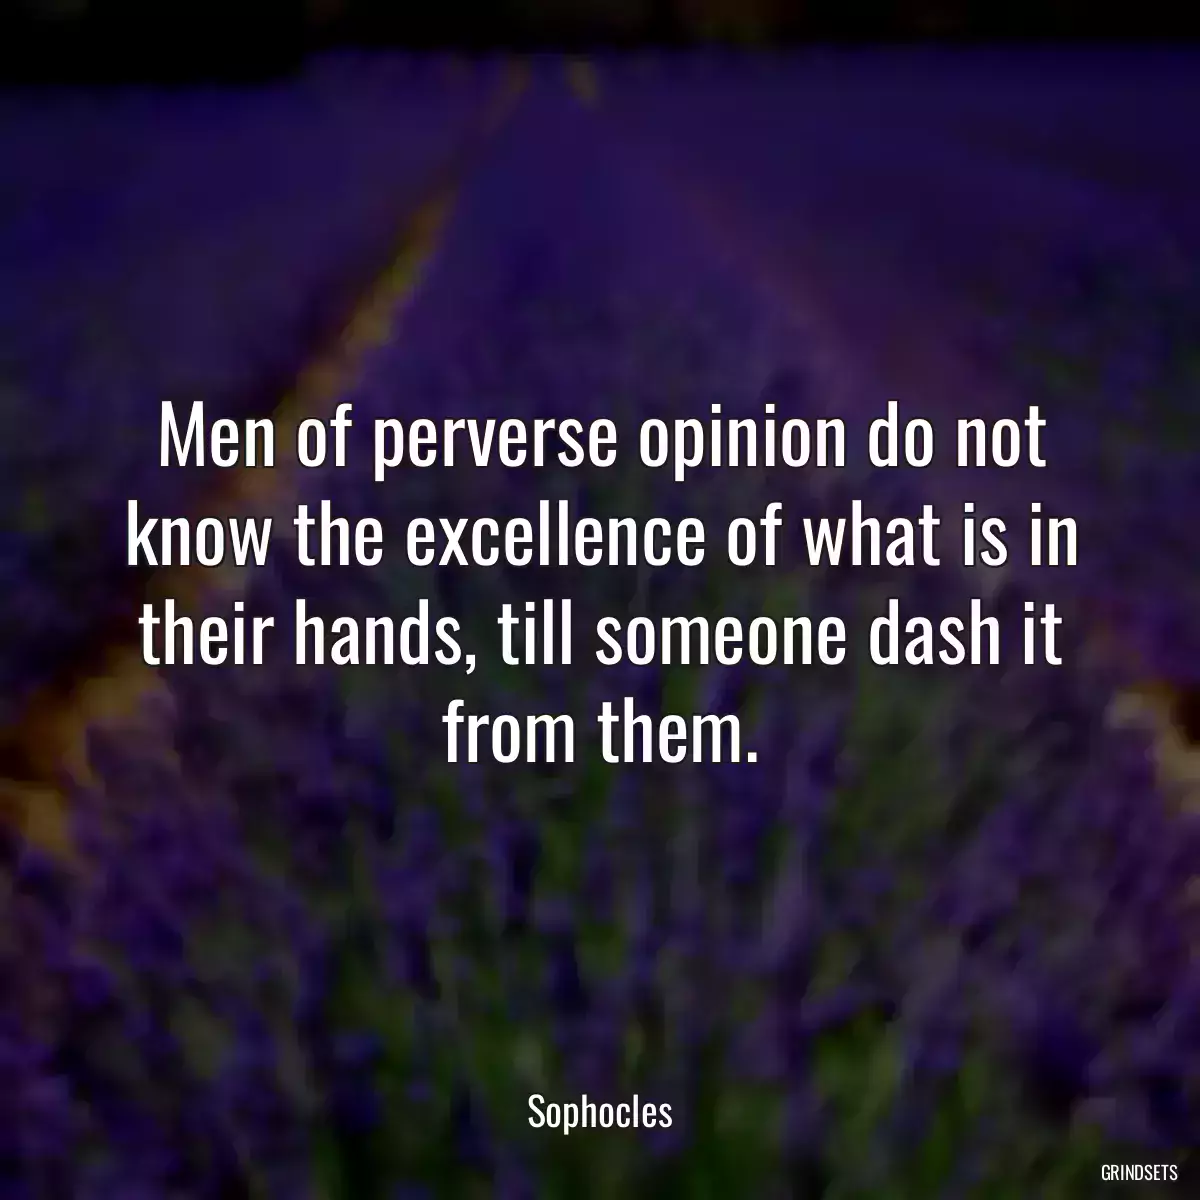 Men of perverse opinion do not know the excellence of what is in their hands, till someone dash it from them.